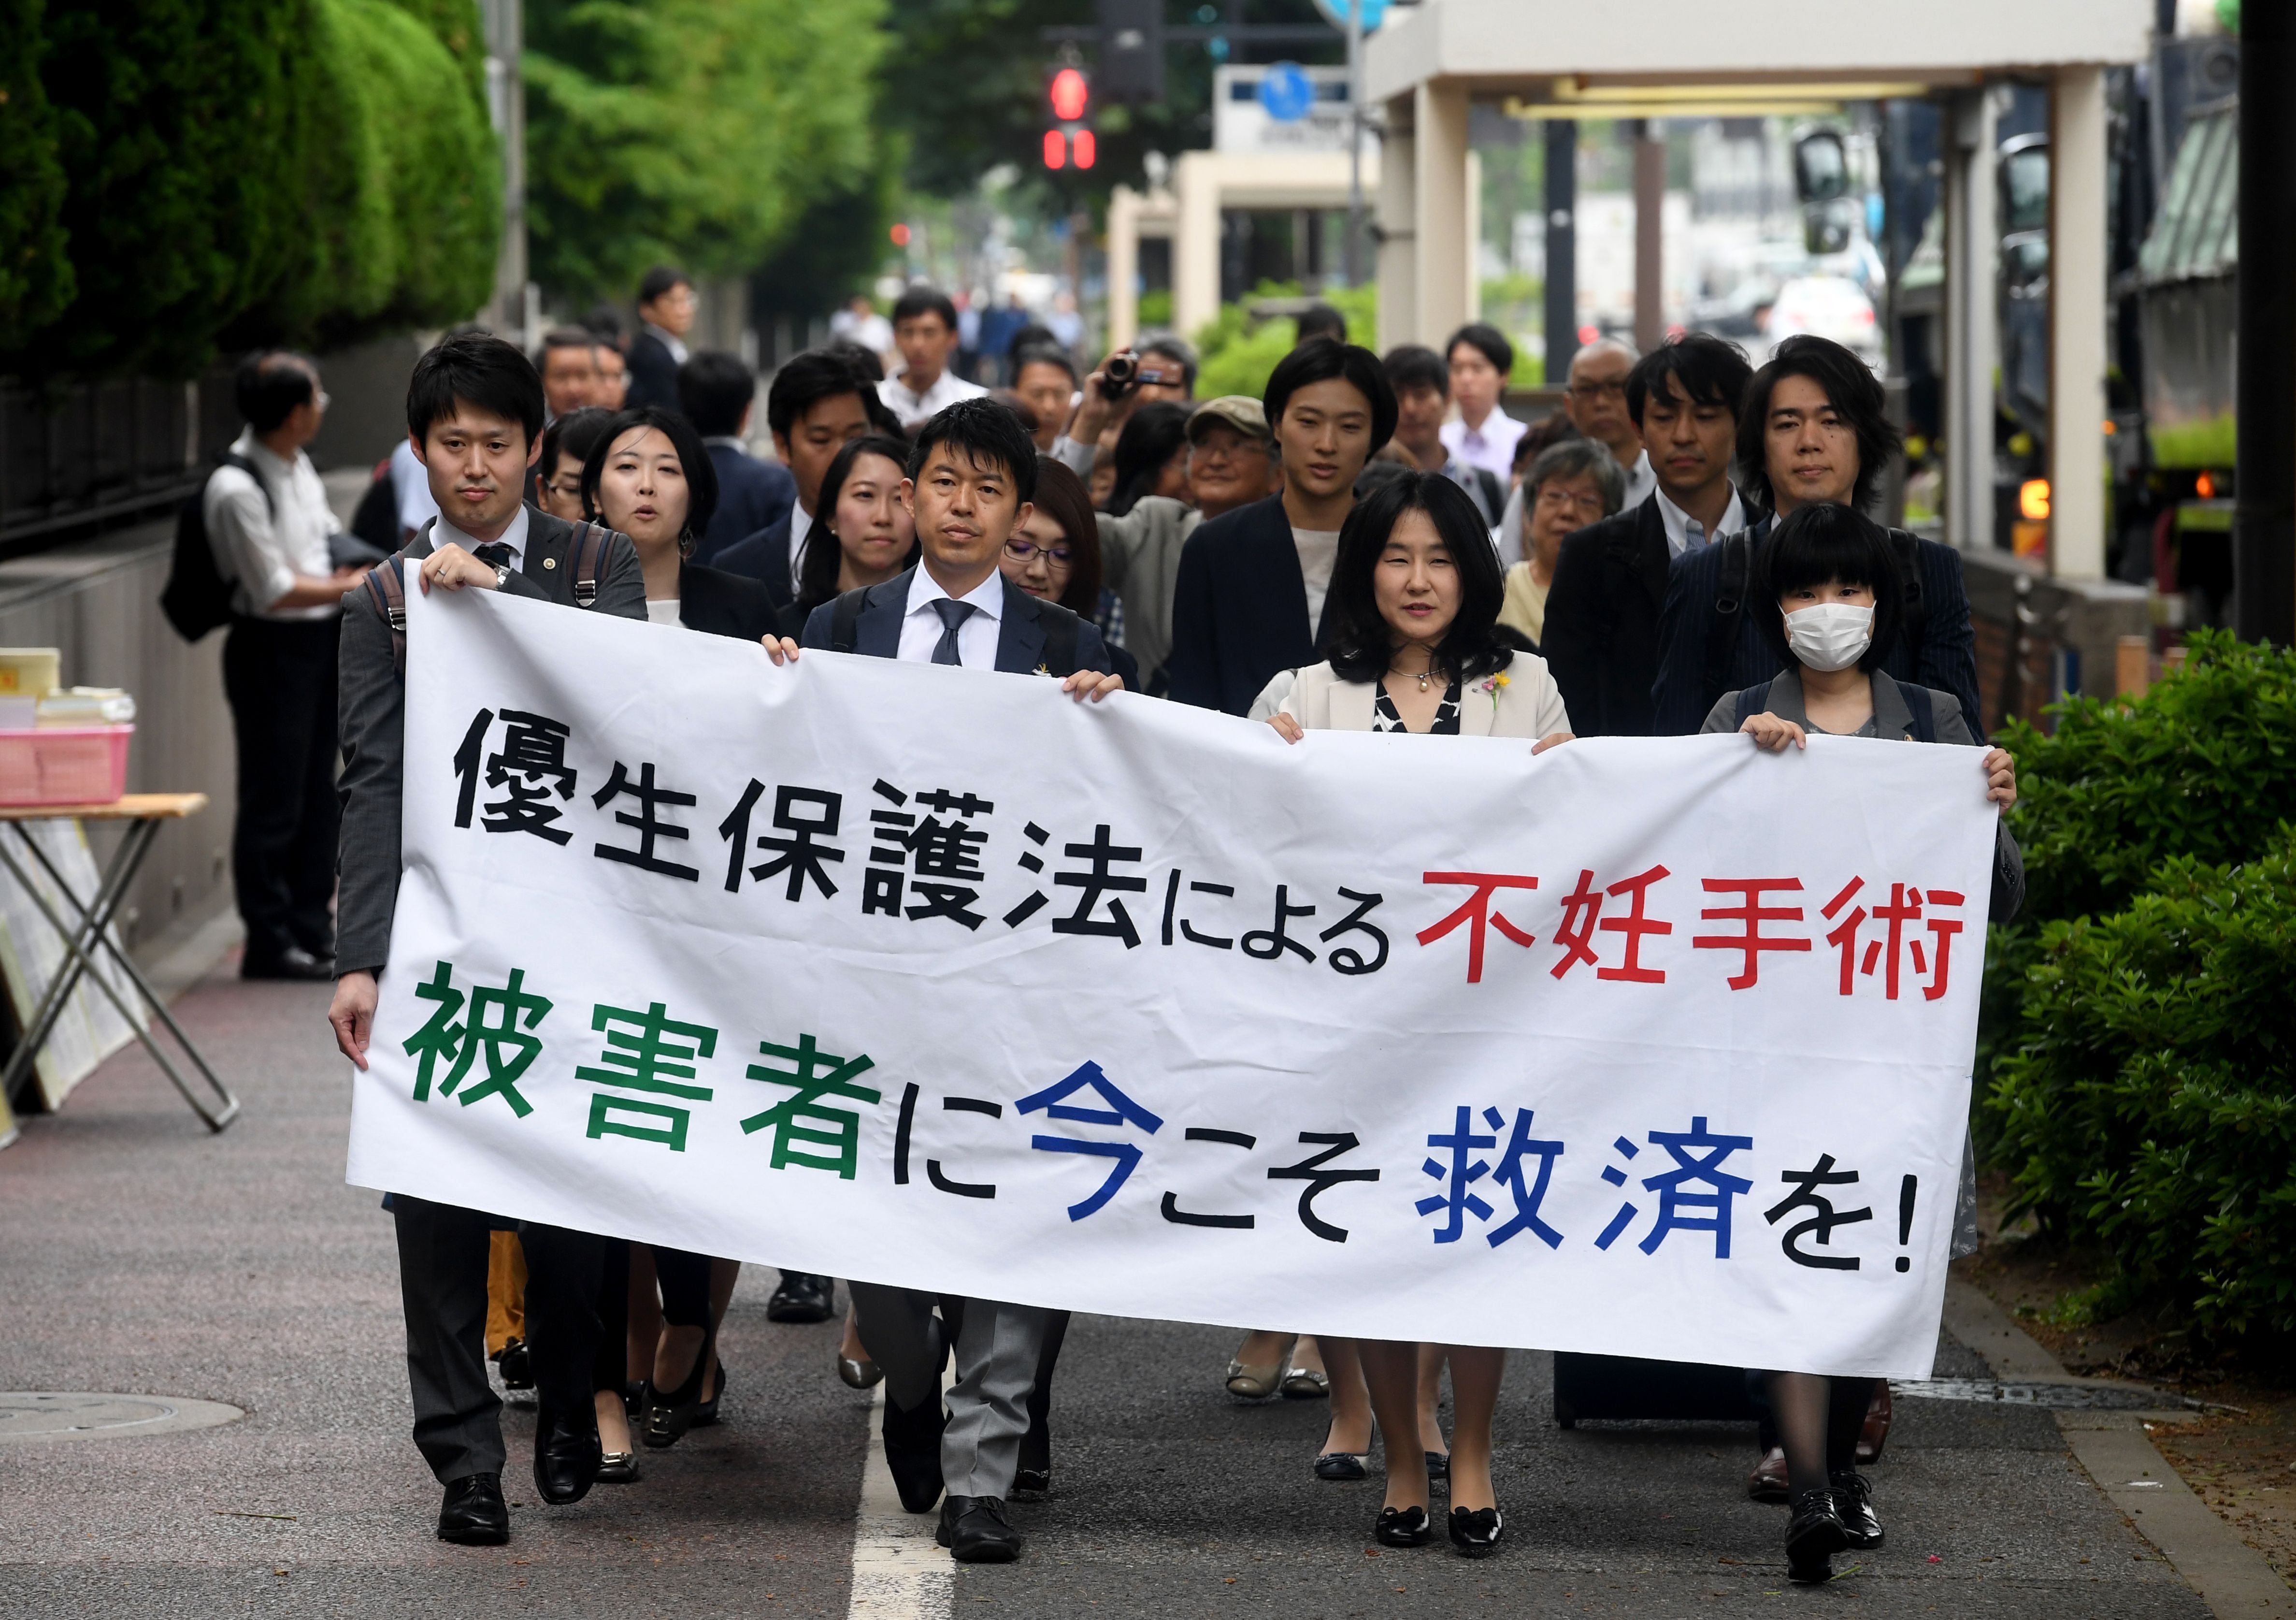 Lawyers and supporters of victims carry a banner saying “Sterilisation under the eugenics law. Relief measures for the victims required now!"